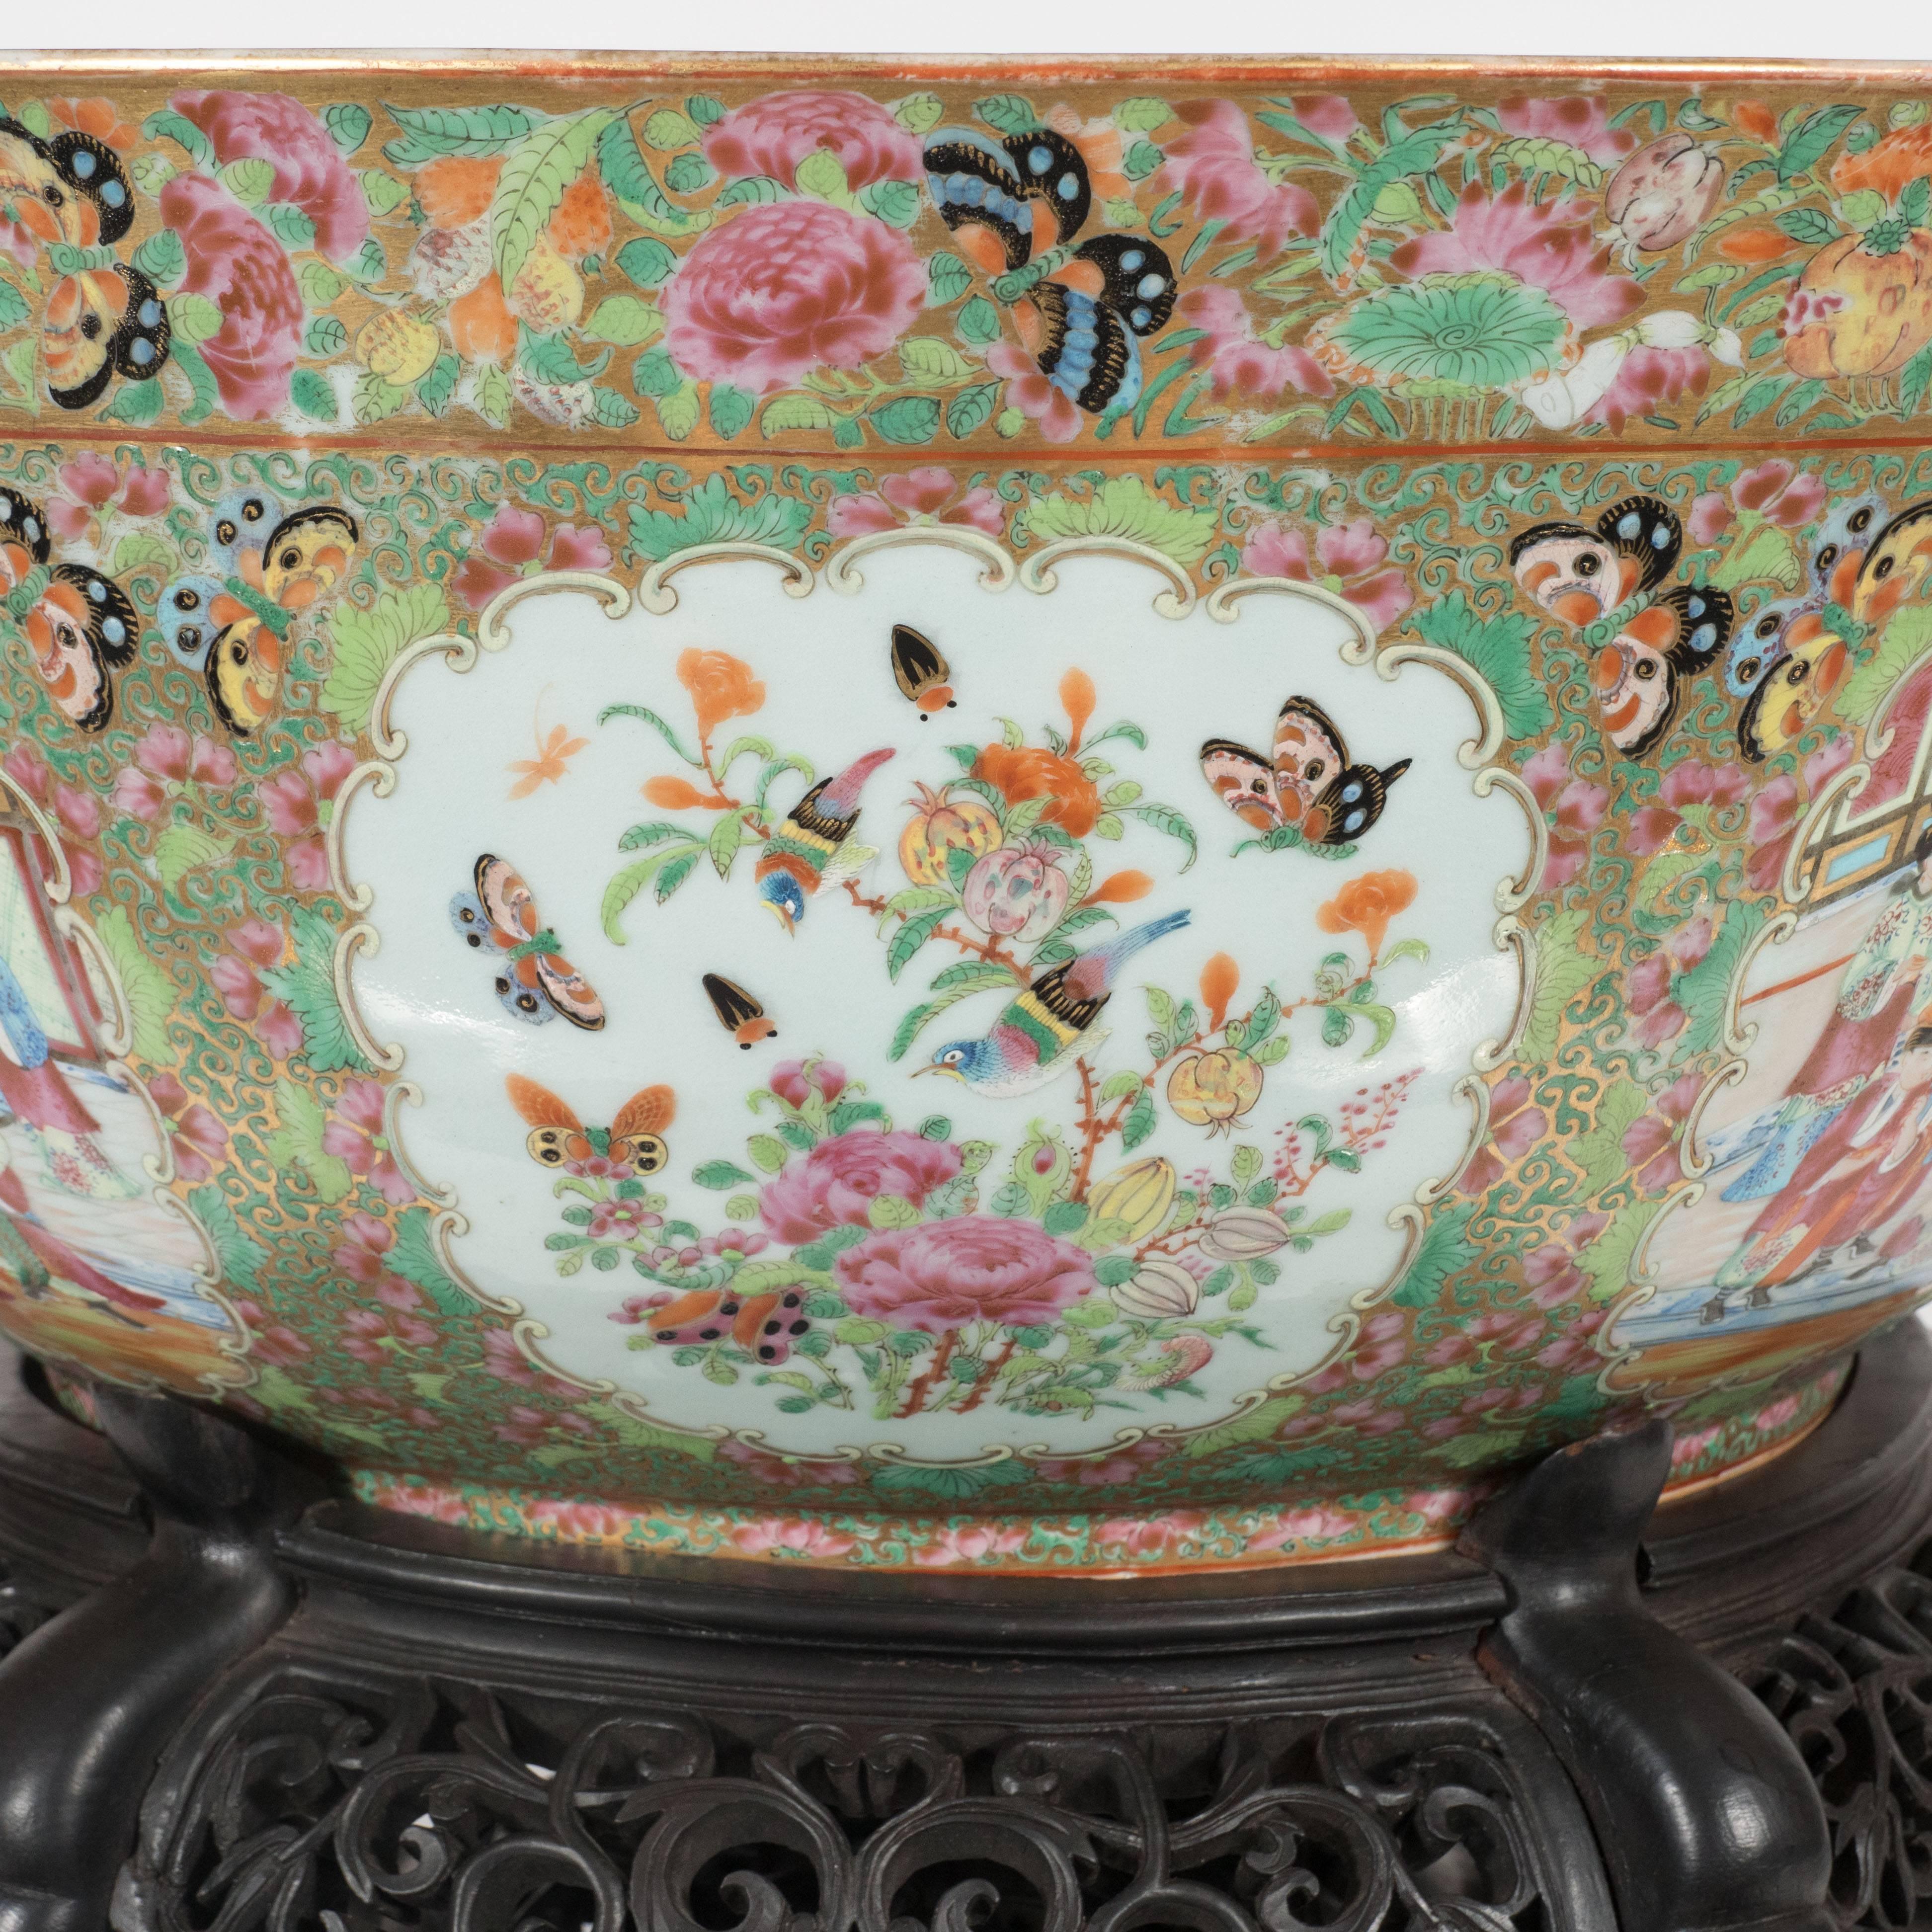 This rare and exquisite rose medallion porcelain bowl was realized in China, likely for an American market, circa 1840, when the West demonstrated a voracious demand for products of the east, especially silk tea and porcelain. This stunning piece